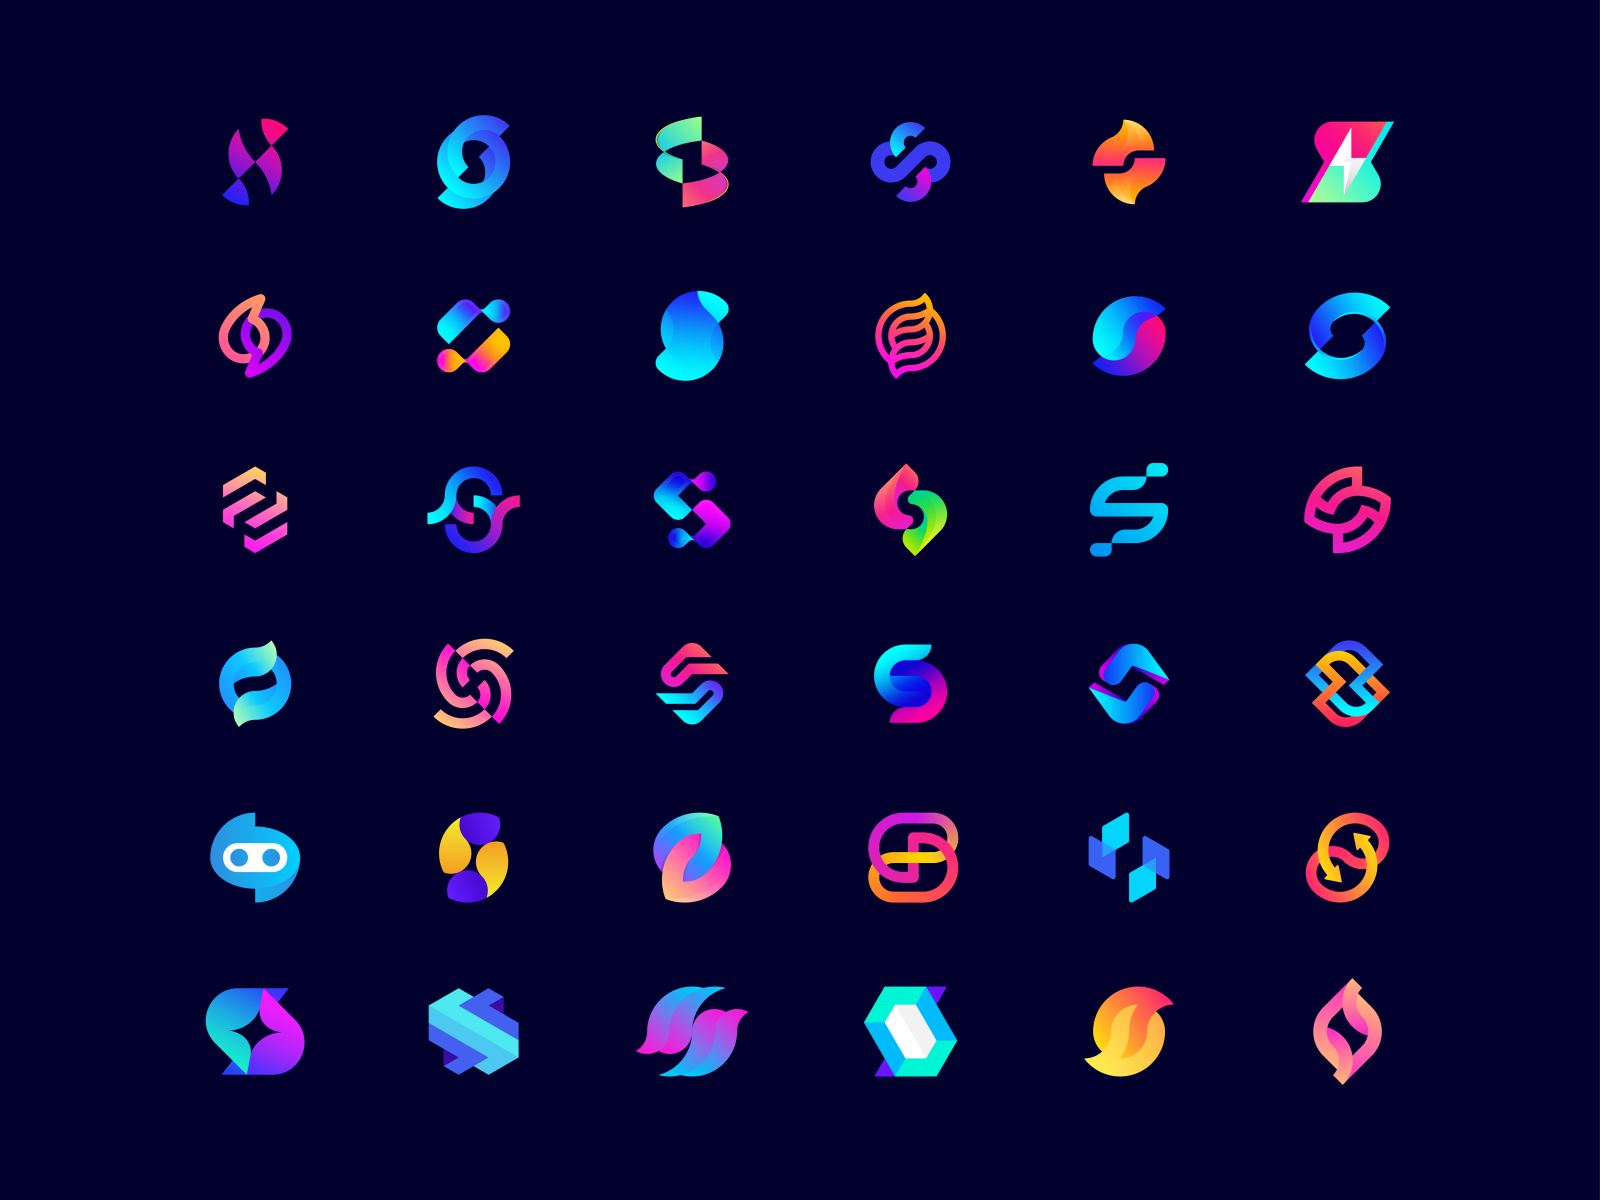 Unused Modern S Logo Collection by Sumon Yousuf on Dribbble